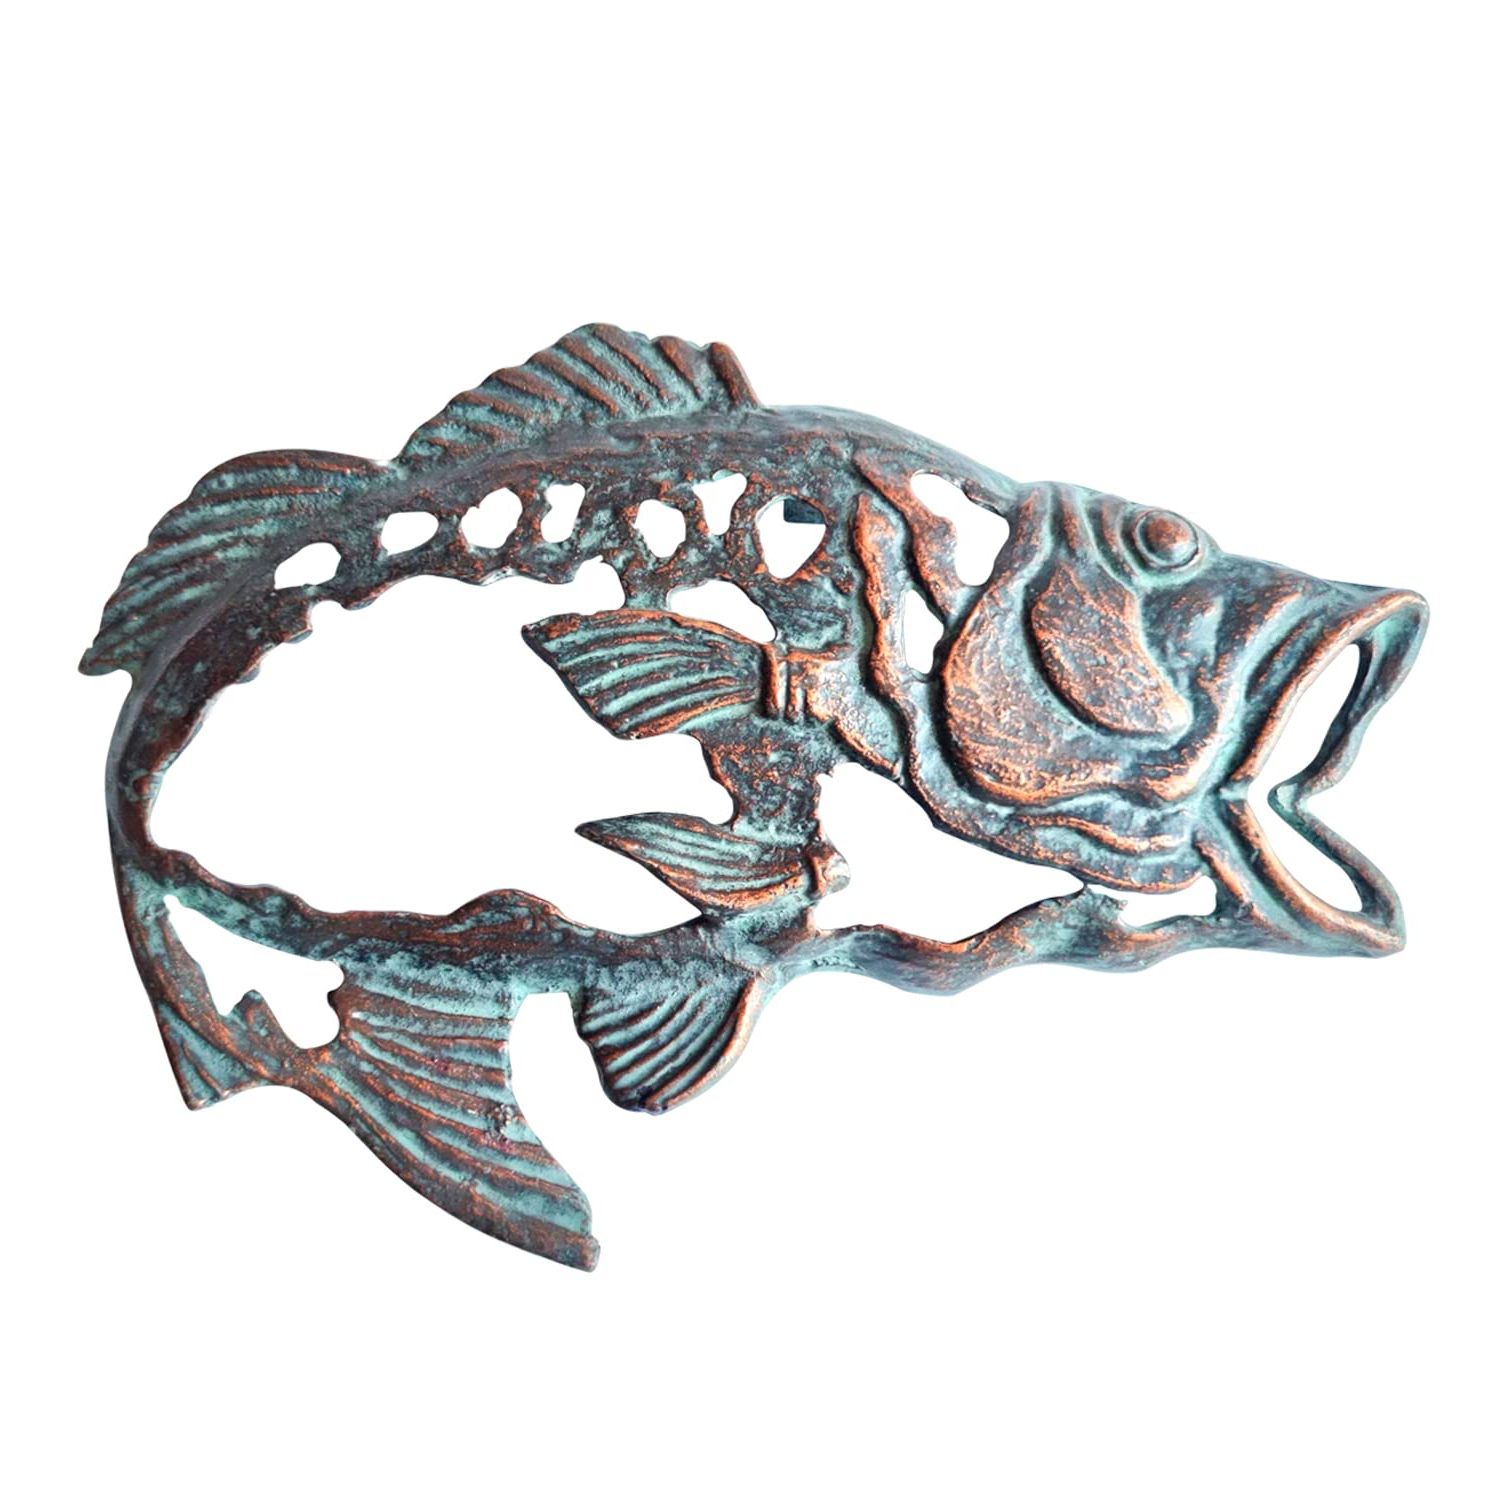 Heavy Duty Wall Art Inside Current Amazon: Cyqgdkf Wall Art Fish Decor – Cast Iron Wall Decor – Unique  Large Mouth Bass Design Metal Wall Art – Heavy Duty Durable Construction –  Easy Mounting – Ideal For Locals, (View 3 of 15)